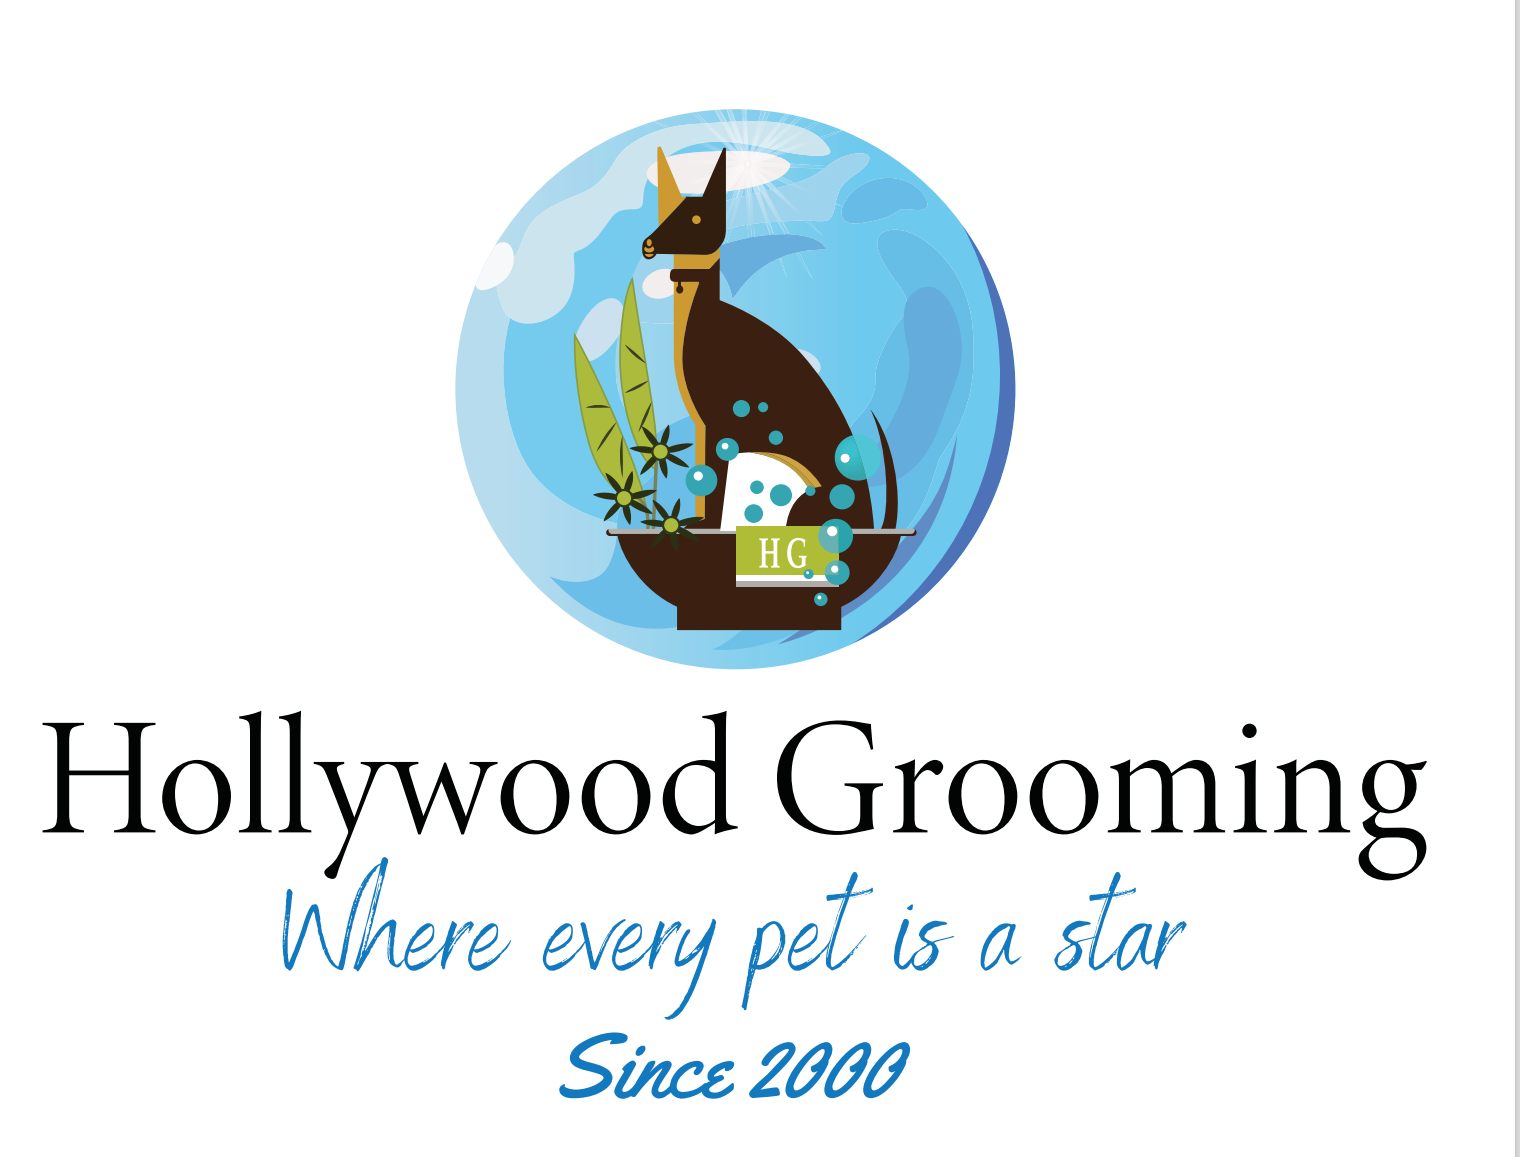 Go Hollywood Grooming